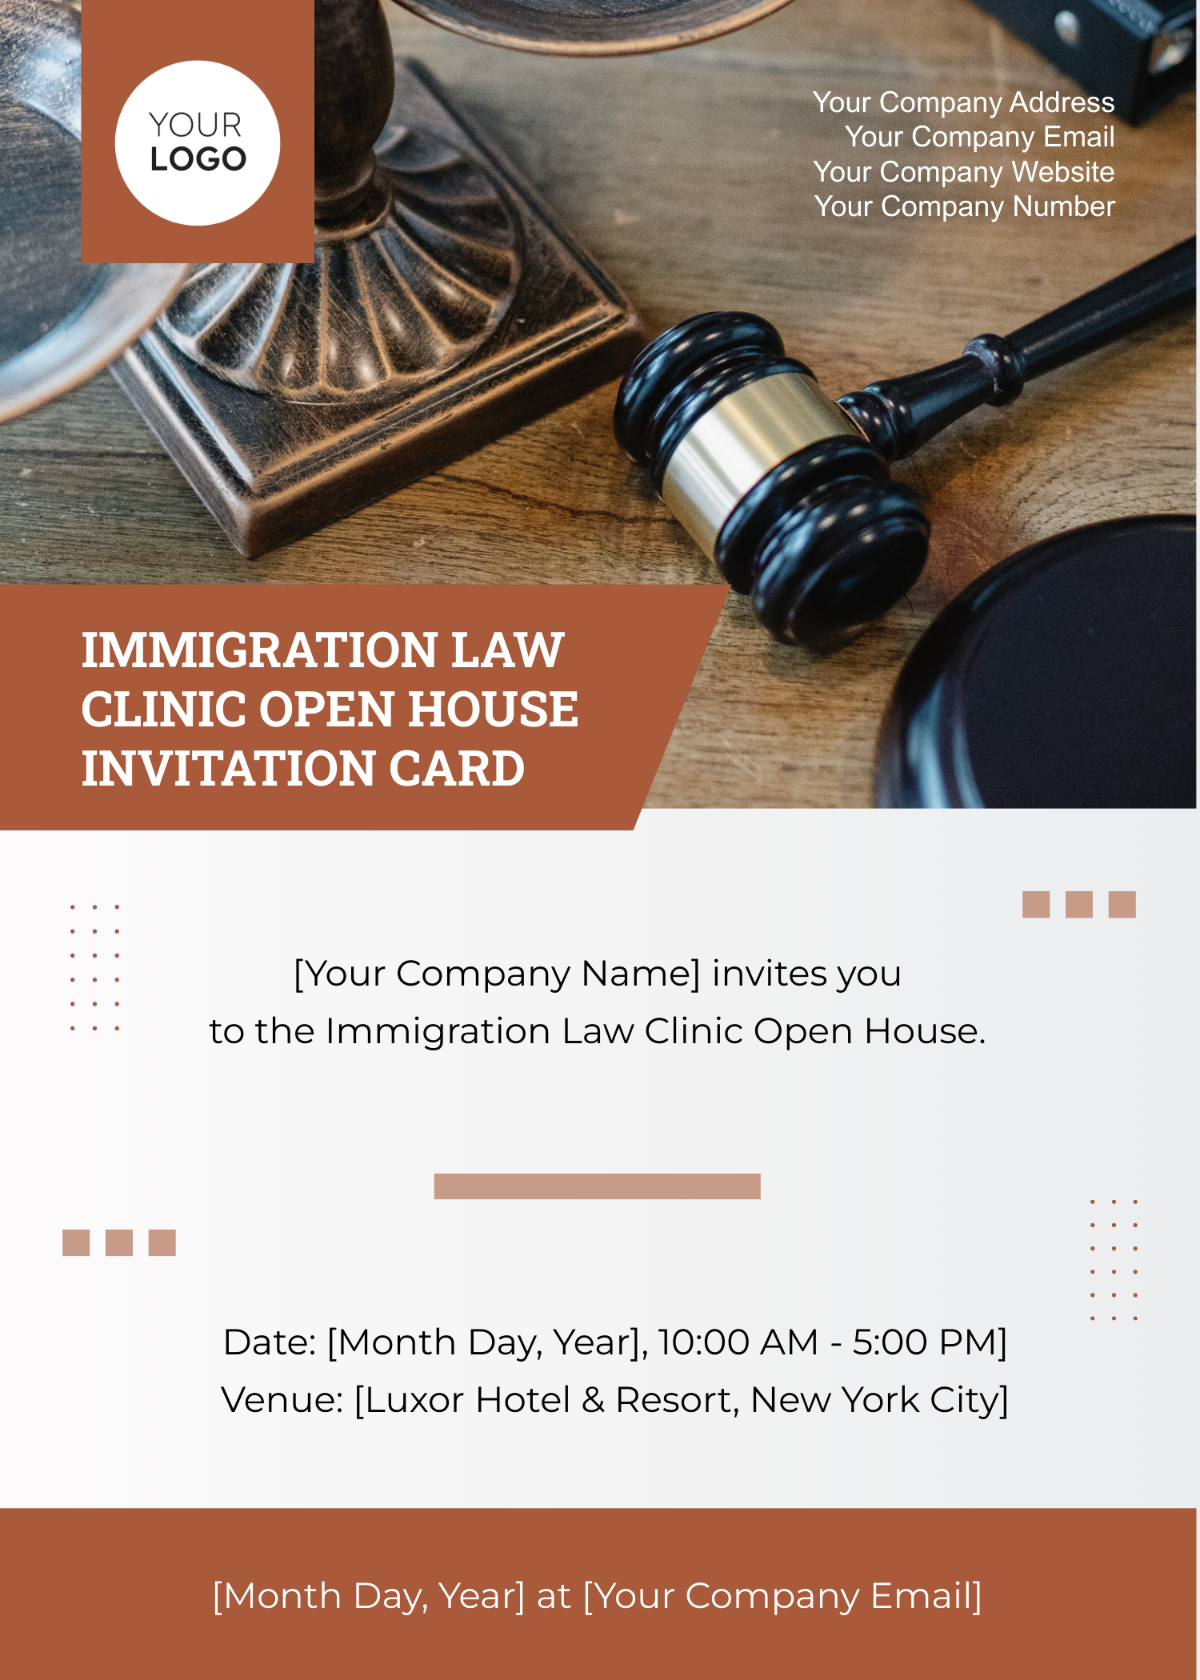 Immigration Law Clinic Open House Invitation Card Template